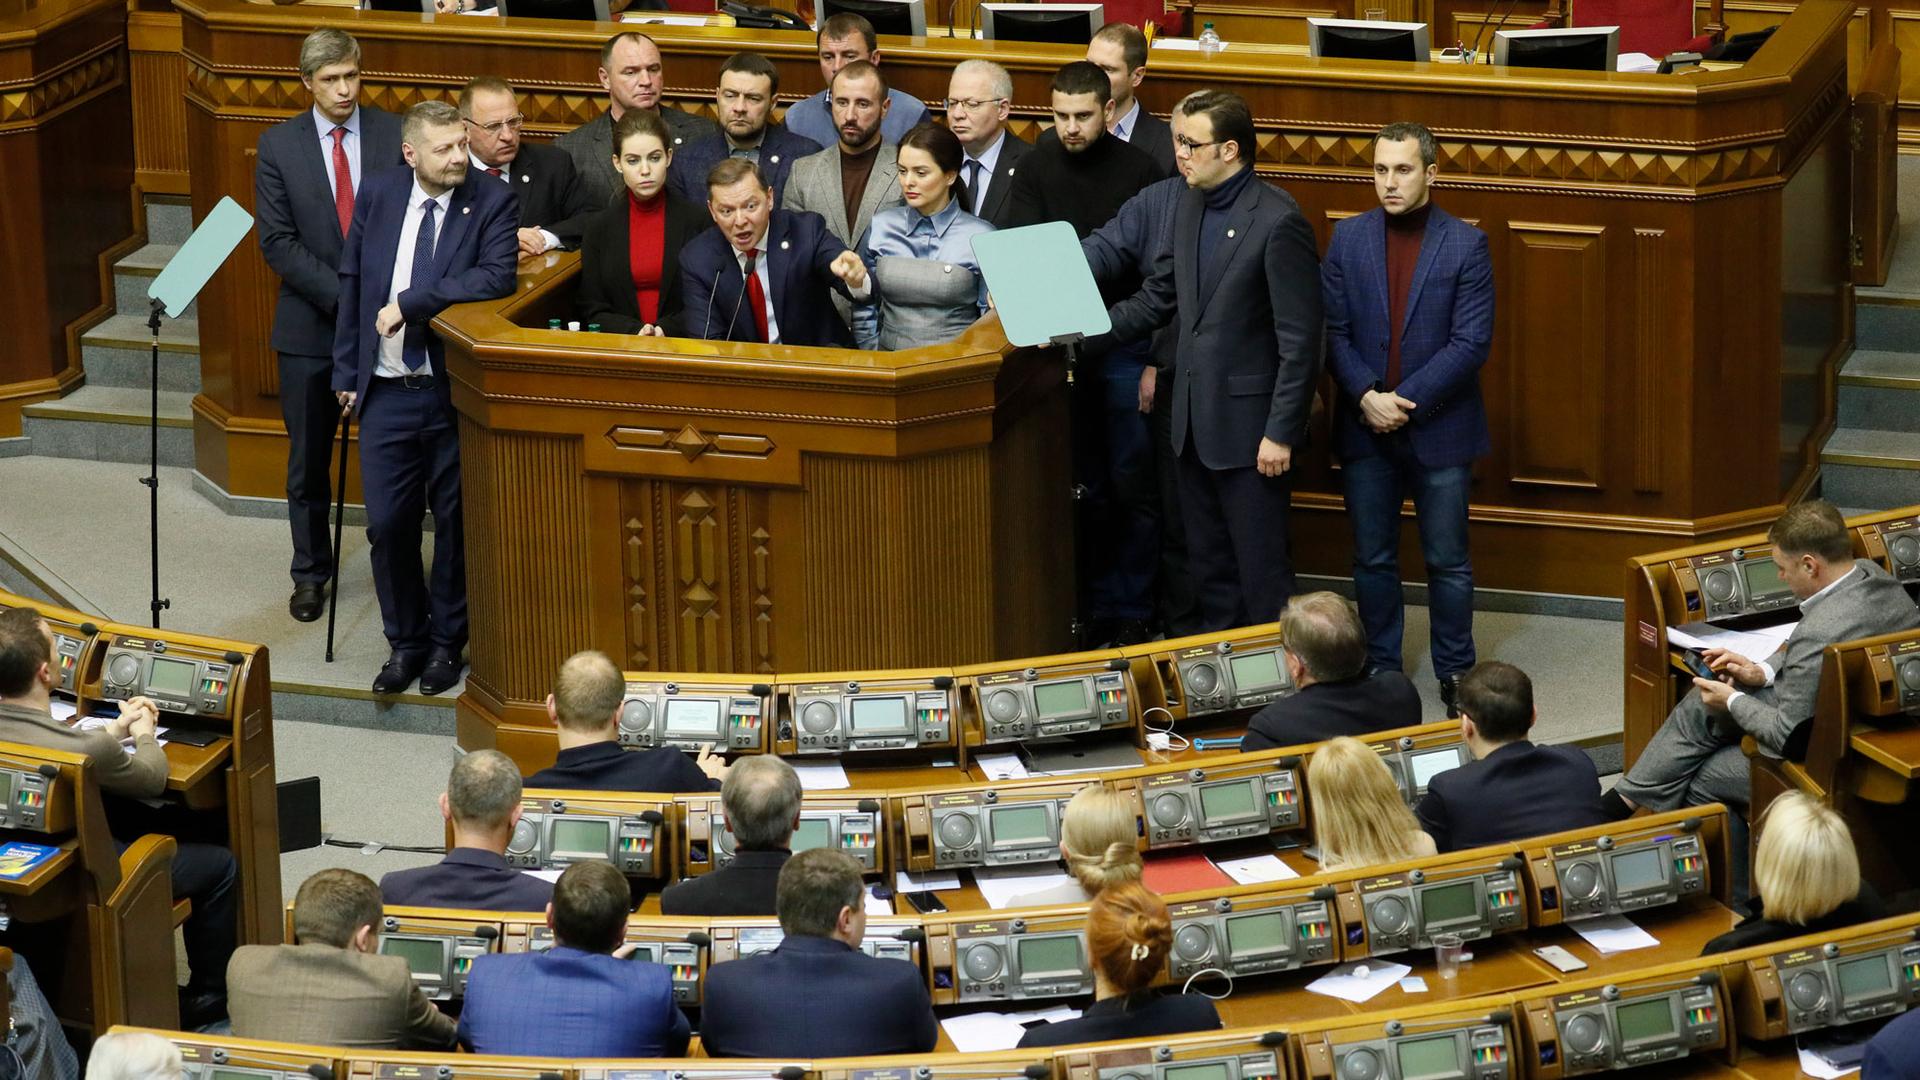 Ukrainian politician Oleh Lyashko is shown with several people behind standing at a podium pointing his finger during a parliament session.